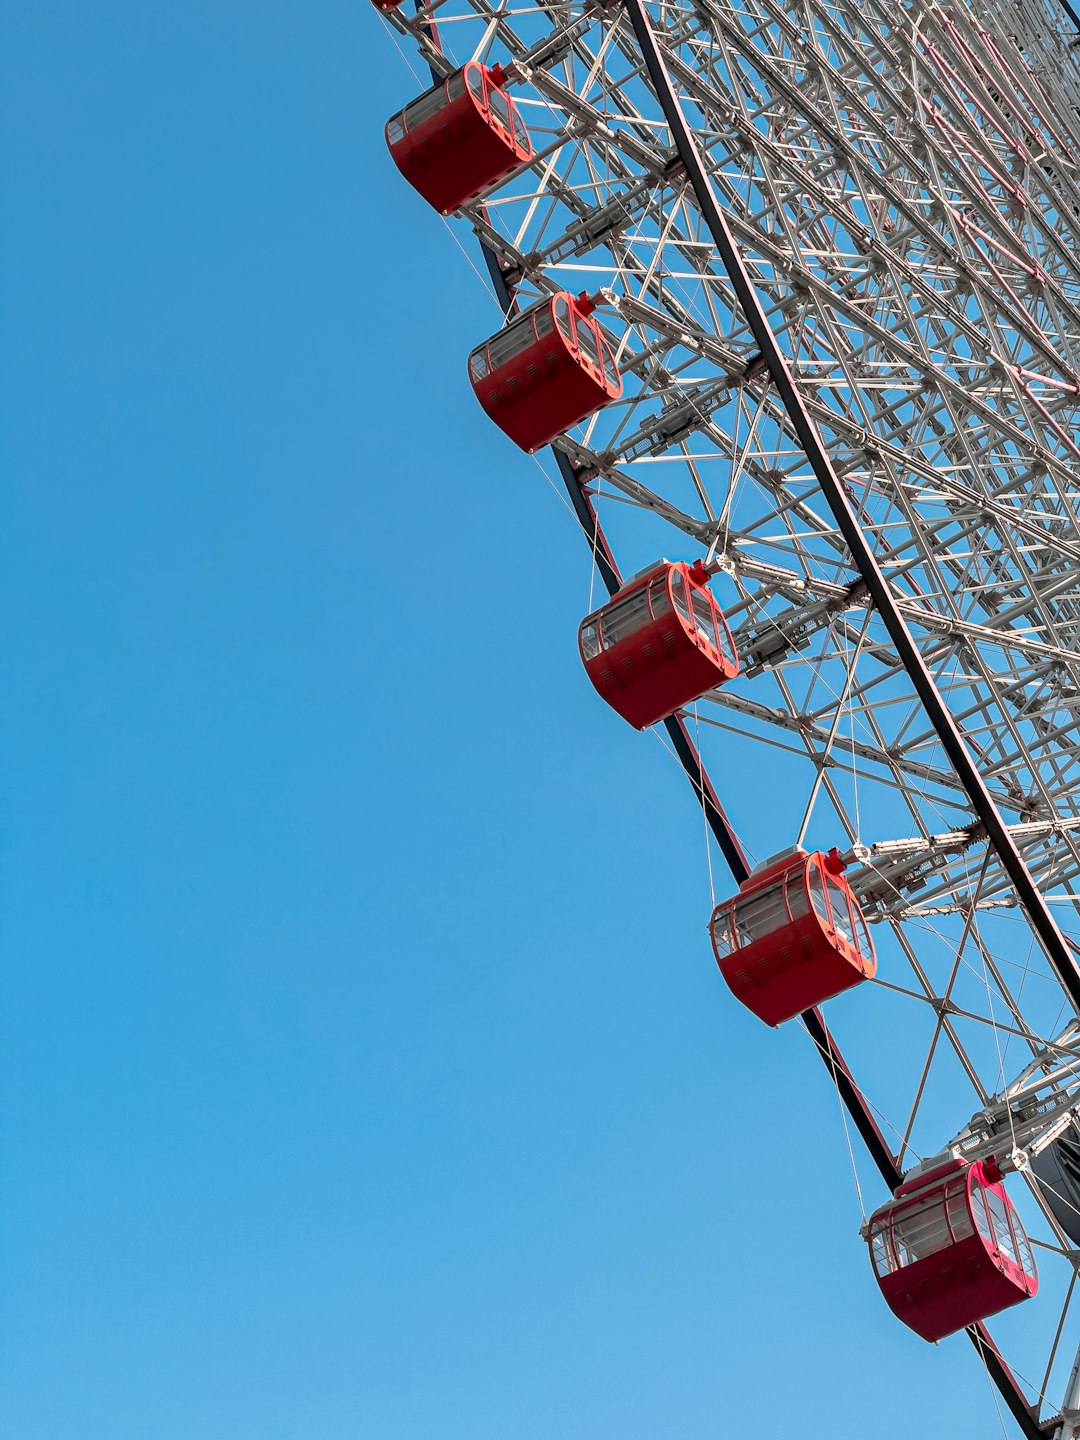 red and gray ferris wheel under blue sky during daytime